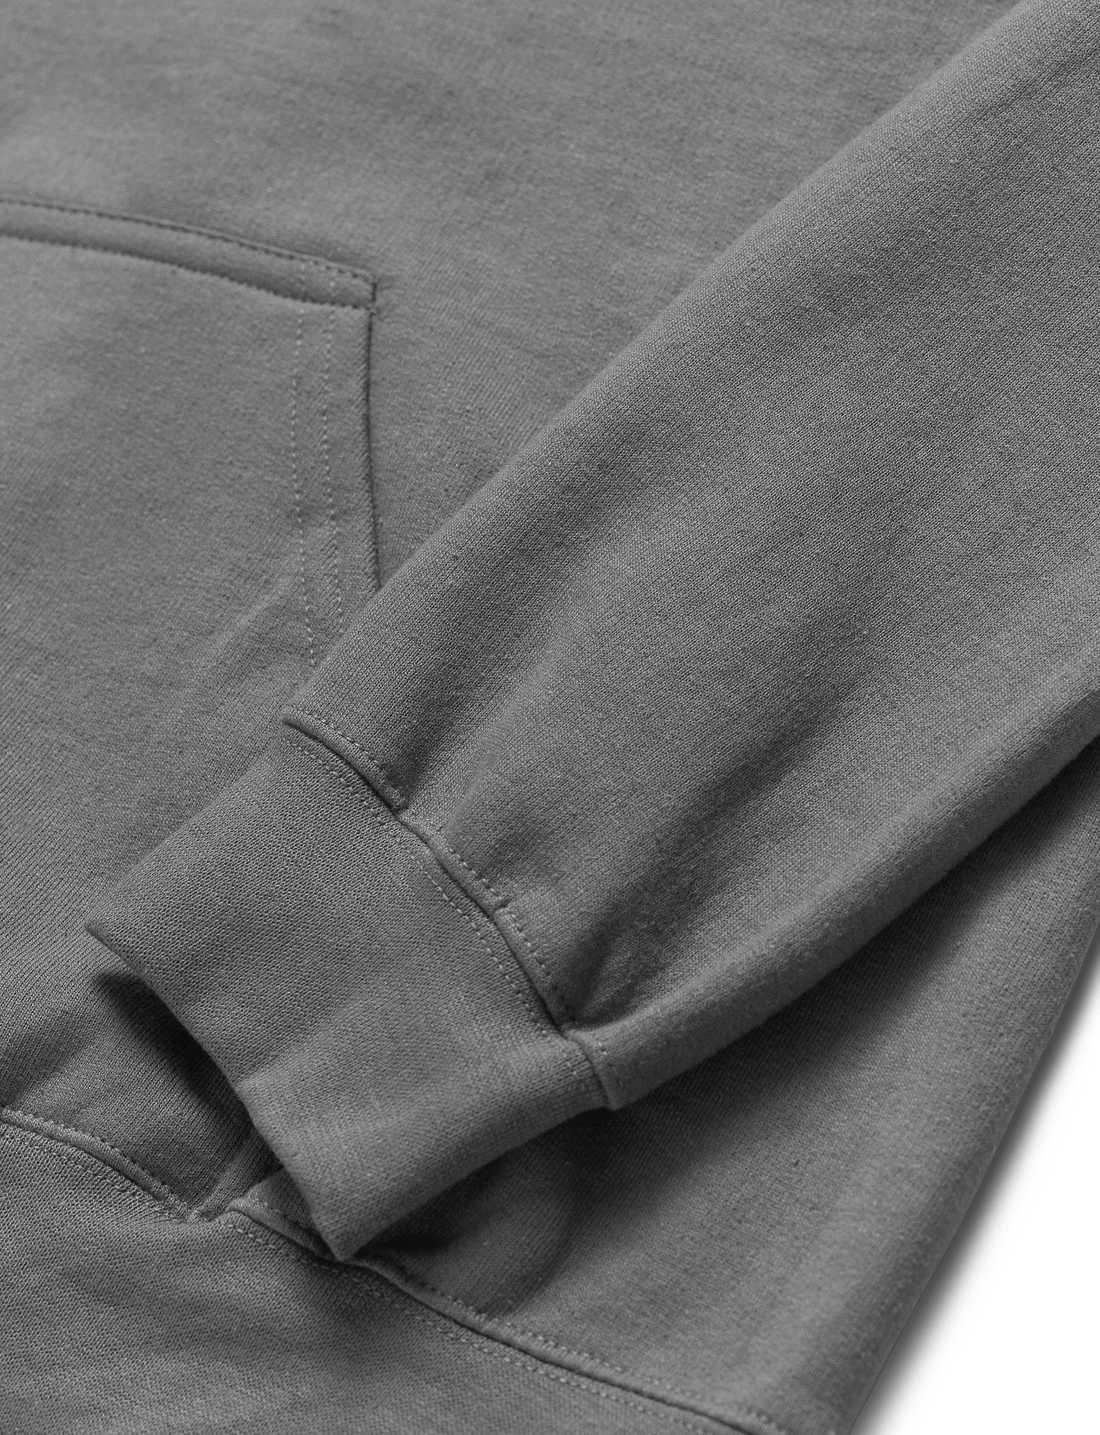 Crisp and clean cuff detail of a charcoal-gray gamer-themed hoodie, focusing on the high-quality fabric and stitching.